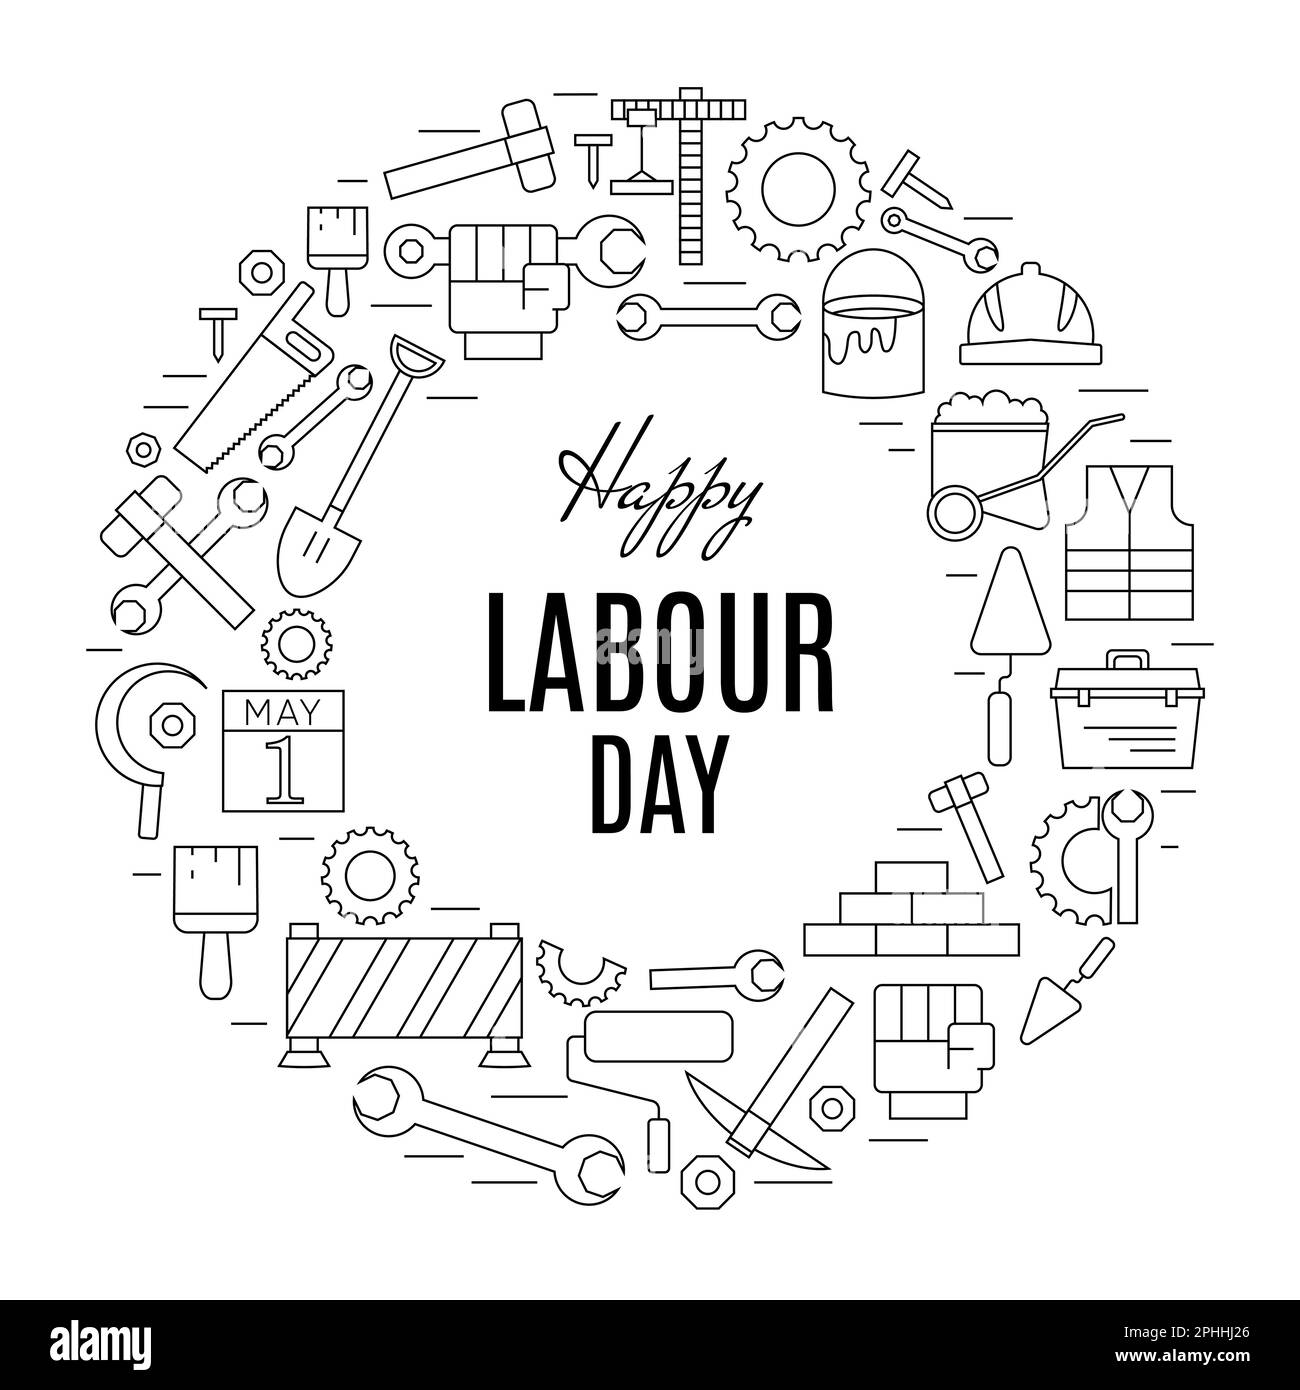 Indian Labour Day Photos and Images & Pictures | Shutterstock-saigonsouth.com.vn